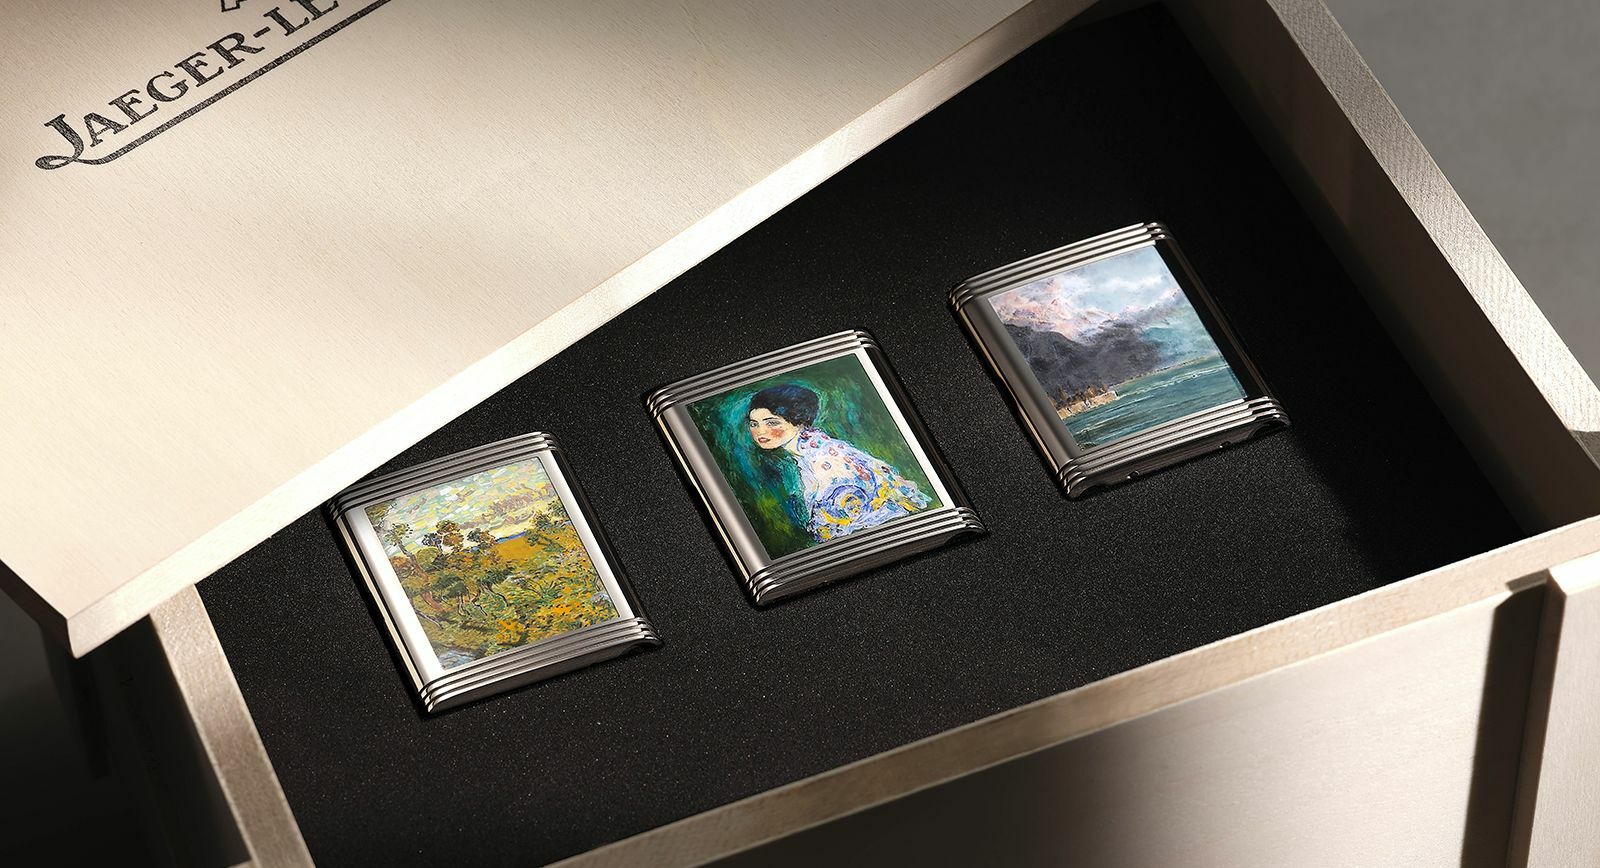 Jaeger-LeCoultre Reverso Tribute Enamel Hidden Treasures watches that celebrate three great masters of Modern Art